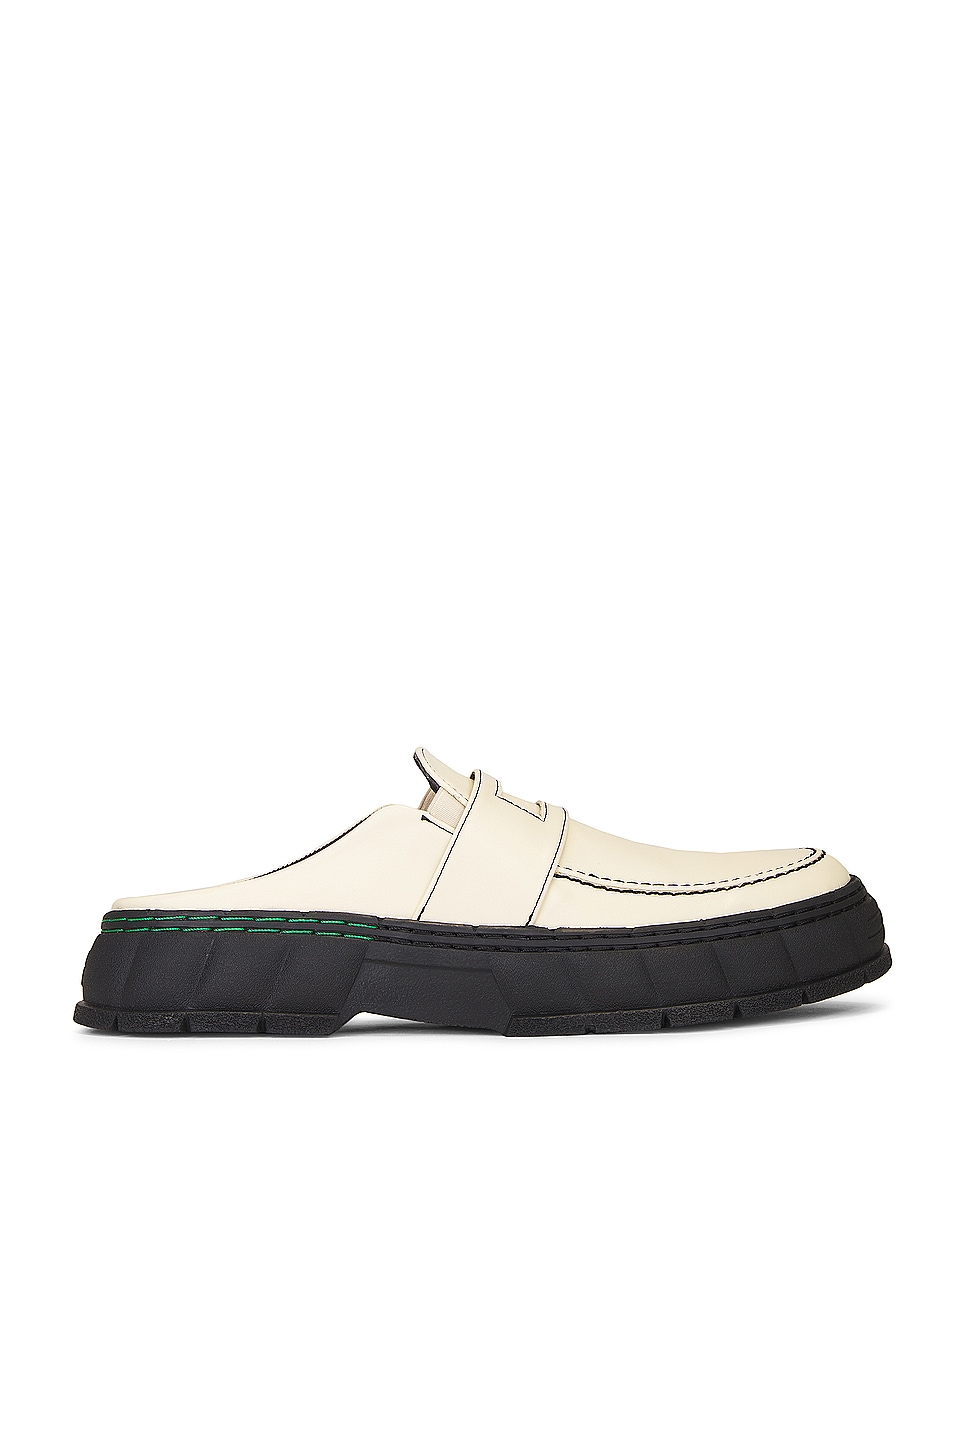 Viron 1969 Mule Loafer in Cream